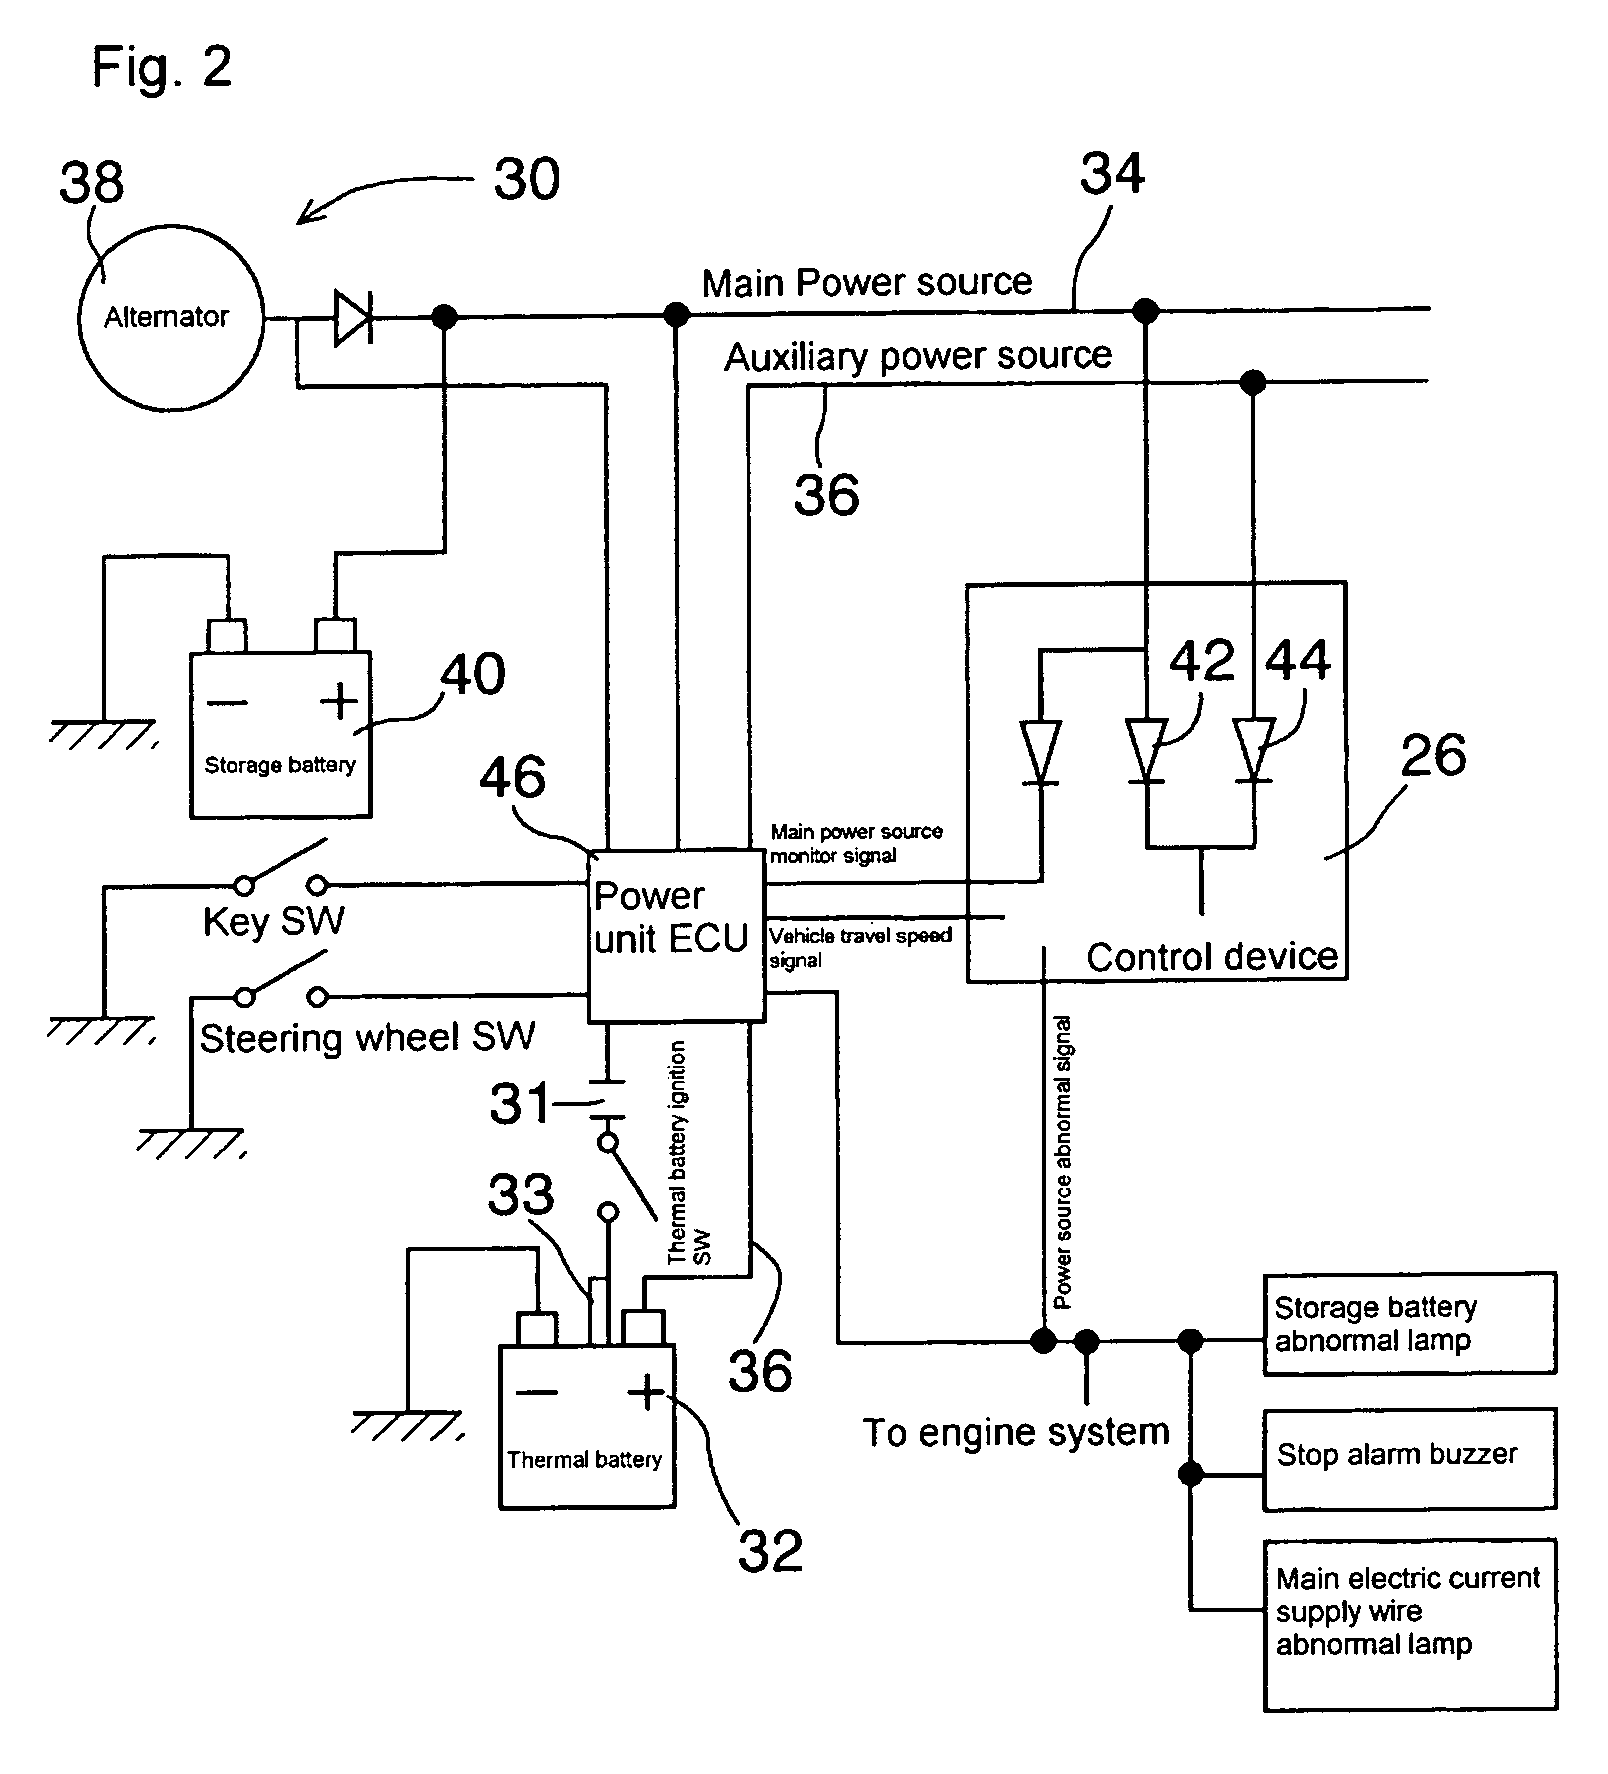 Power unit for conveyance and conveyance provided with the power unit